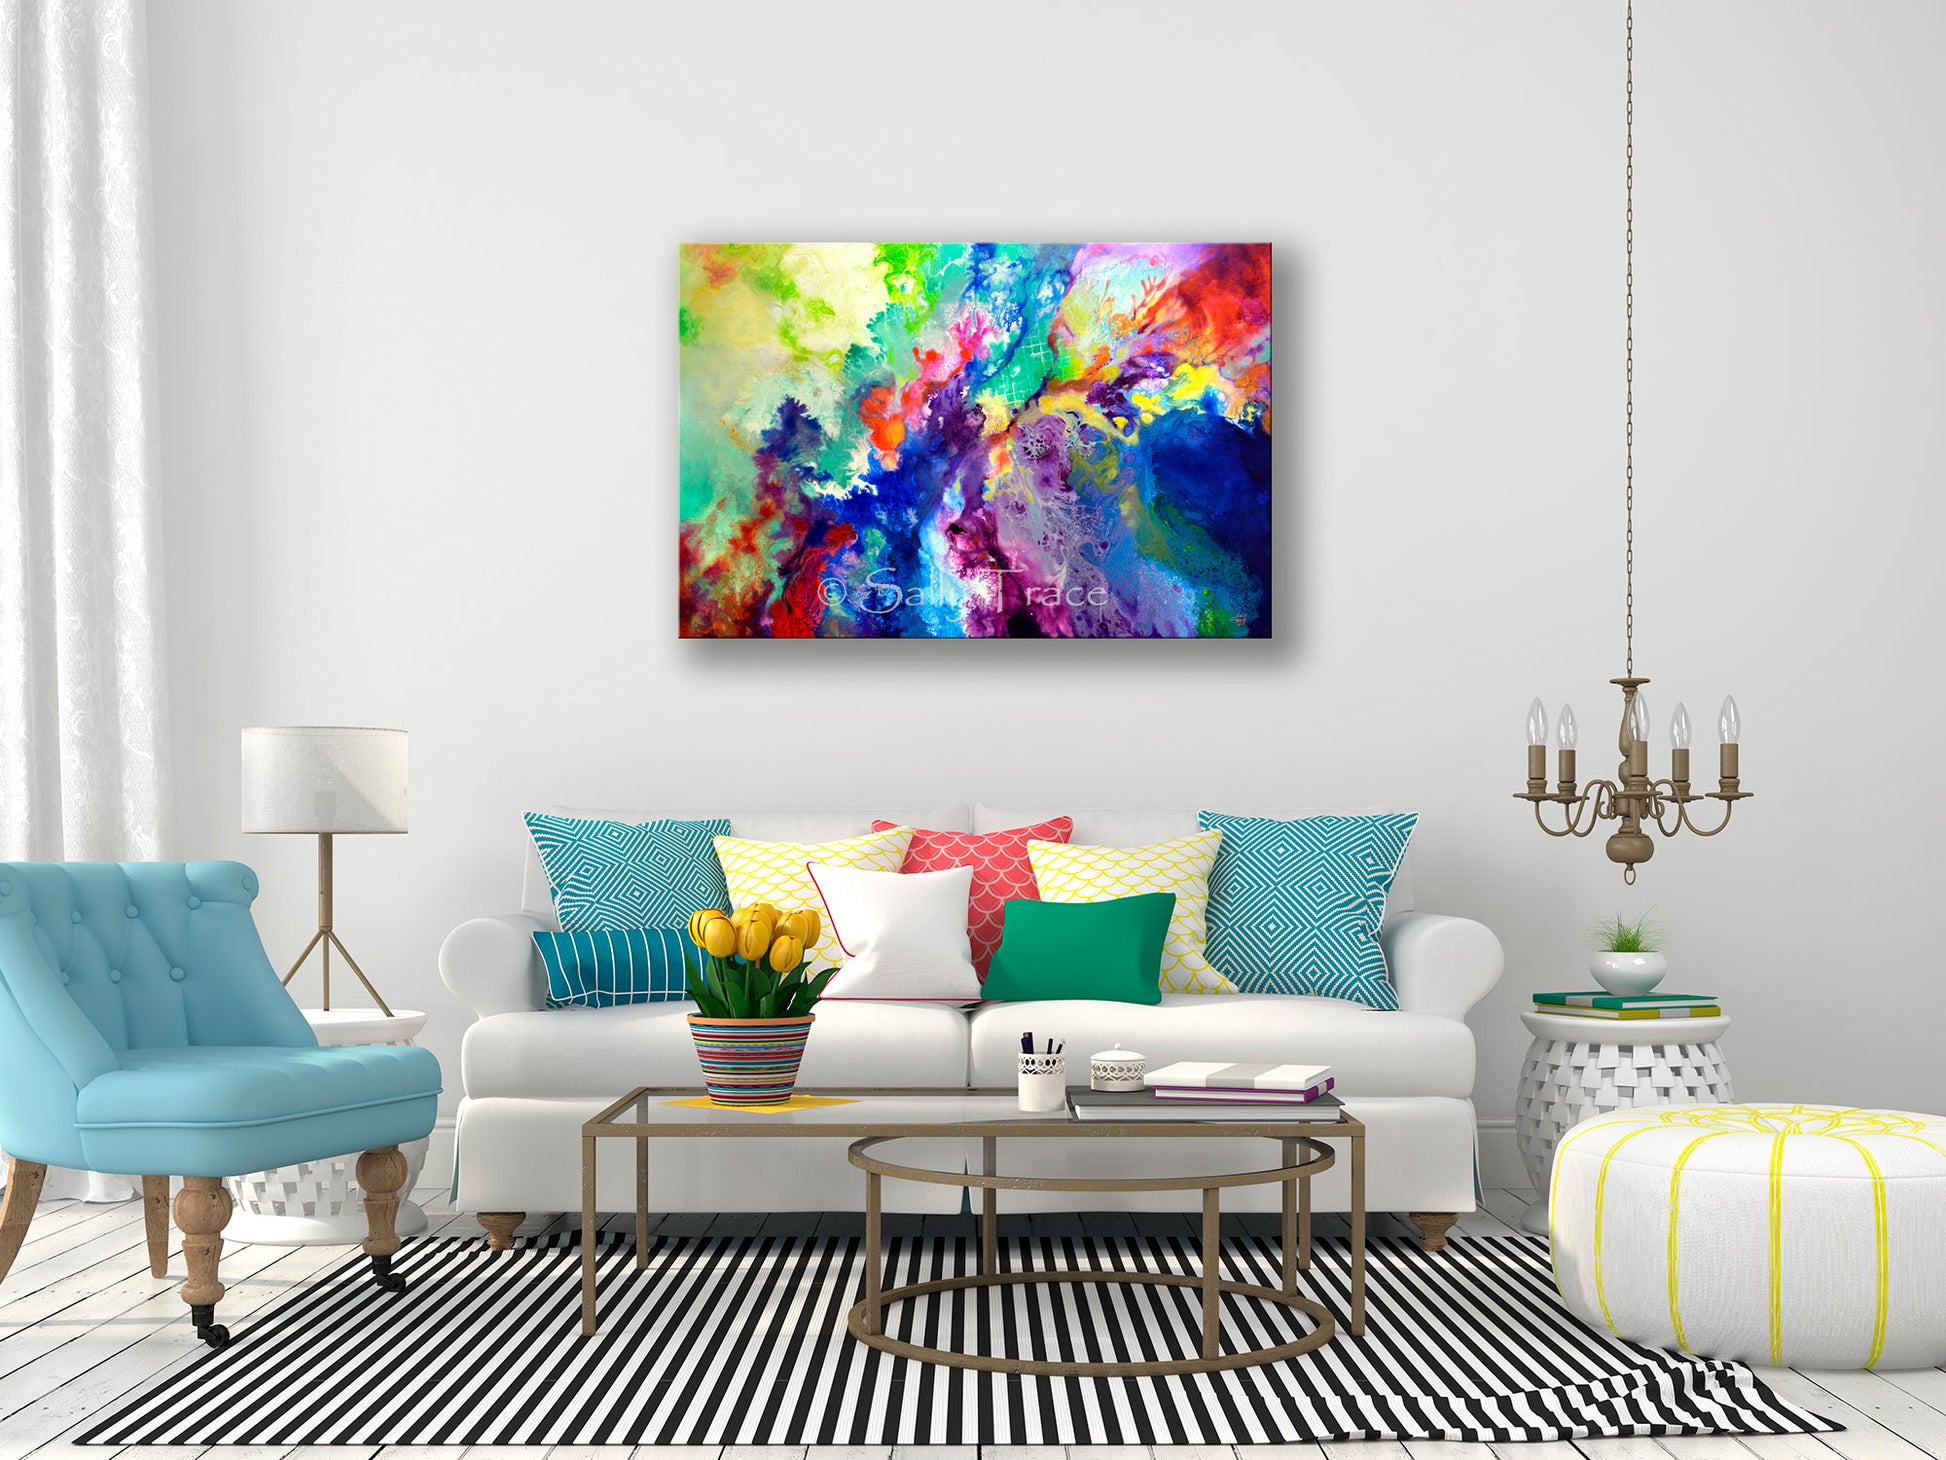 Fluid abstract paiting prints on canvas by Sally Trace "Touch Me Here", room view